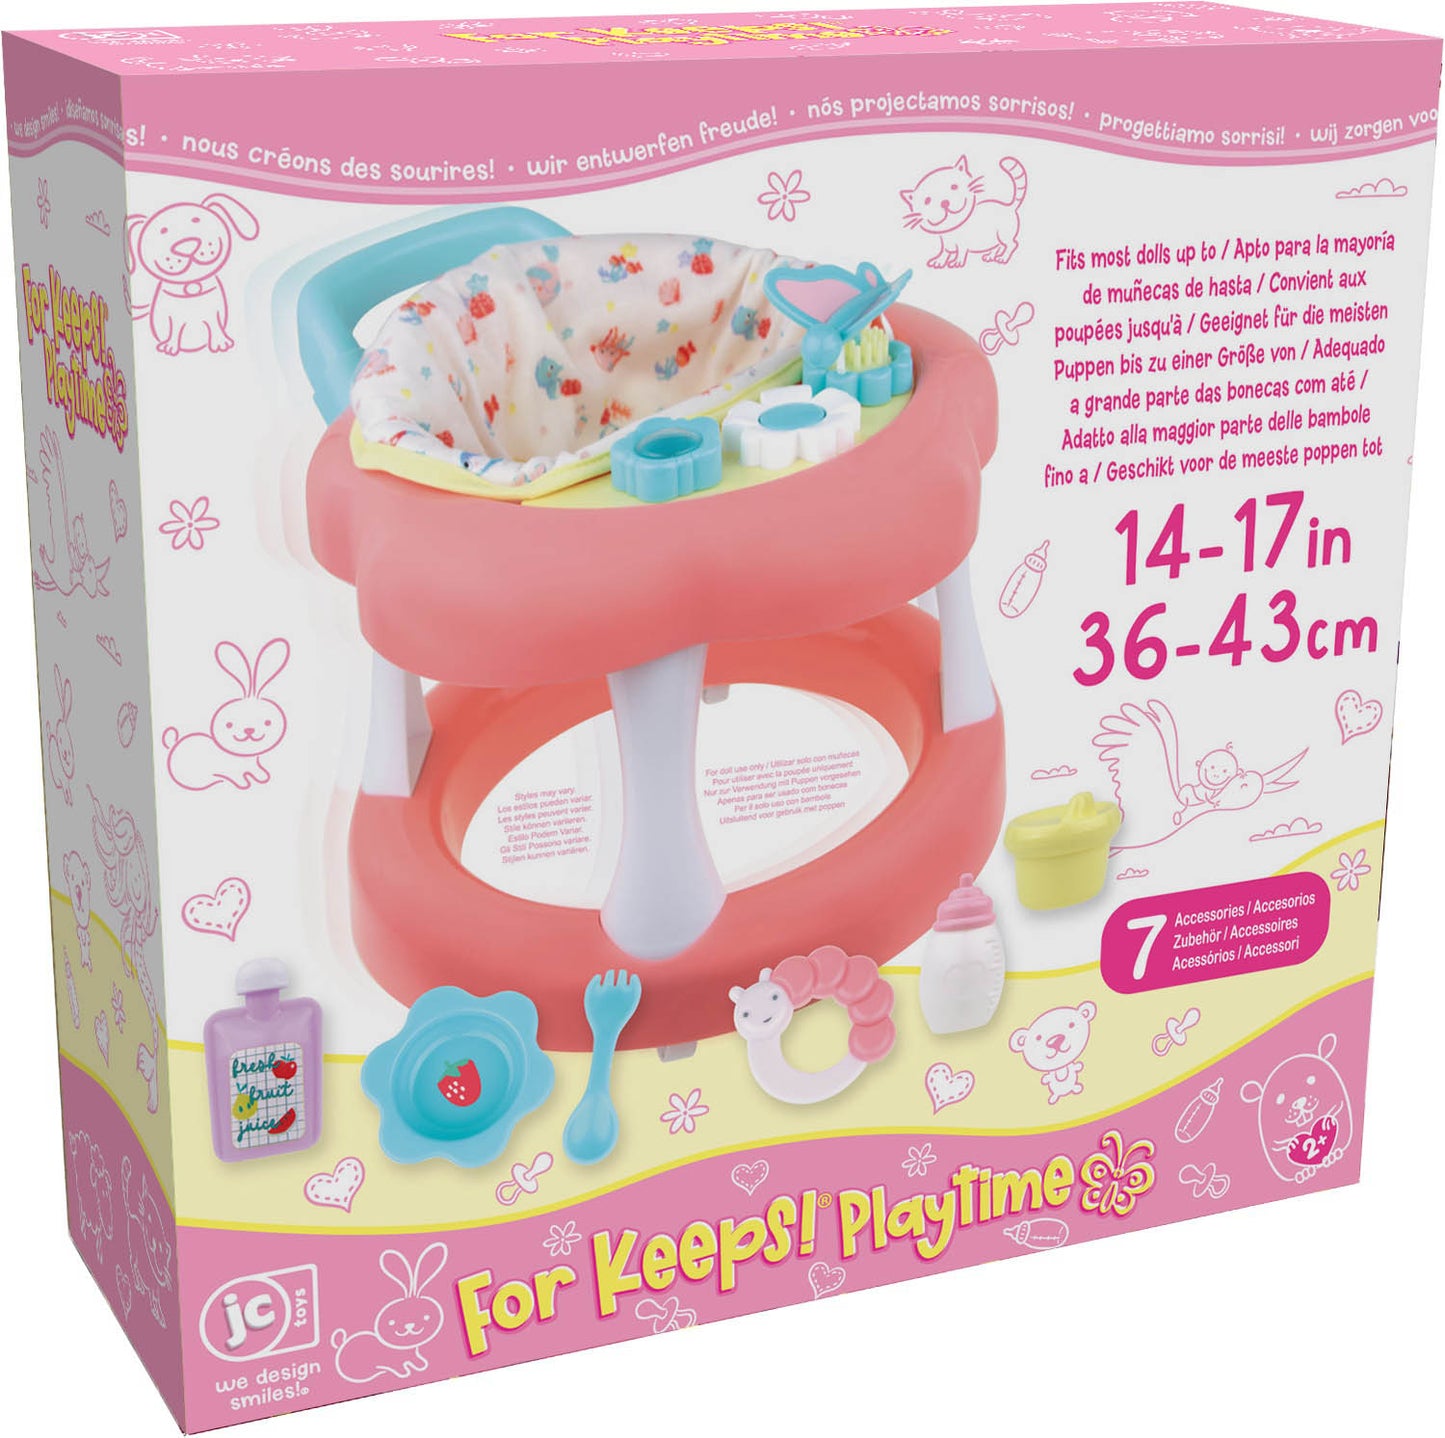 For Keeps! Baby Doll Walker with play accessory for dolls up to 16"